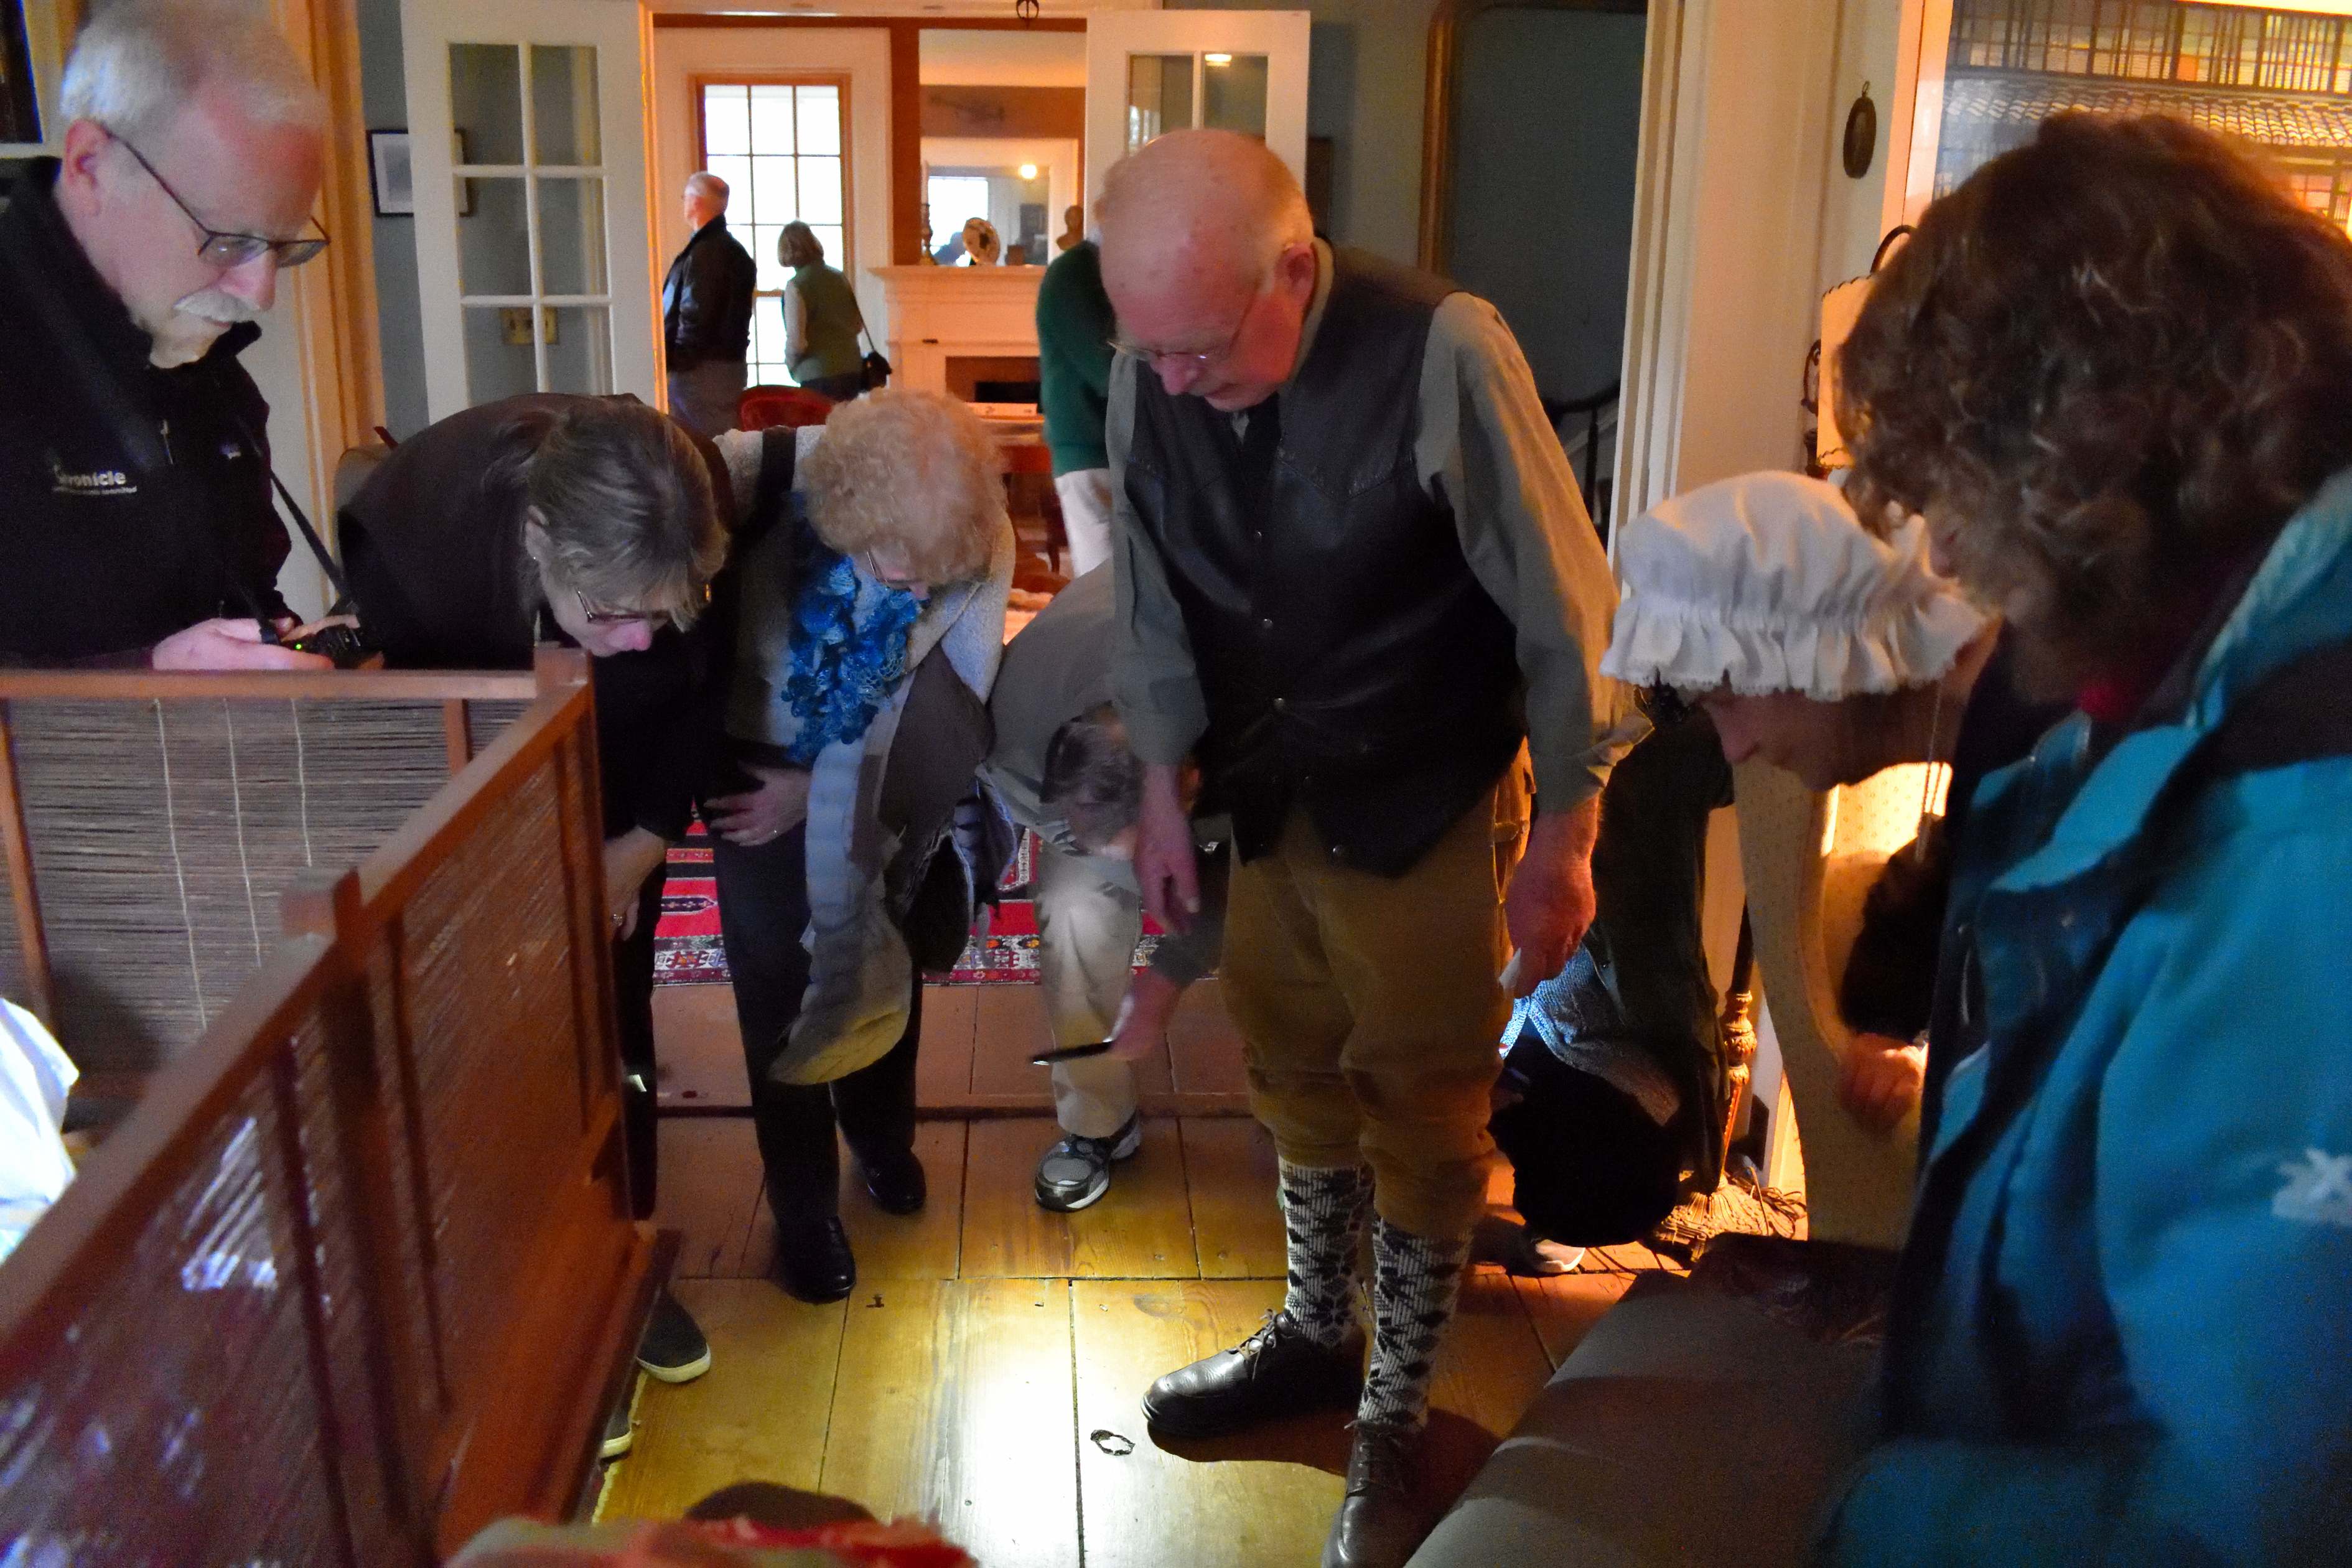 Owner David Bullard showing visitors the blood stains left by wounded soldiers when The Marshall House was used as a hospital during the retreat of the British forces following their defeat at the Battles of Saratoga.